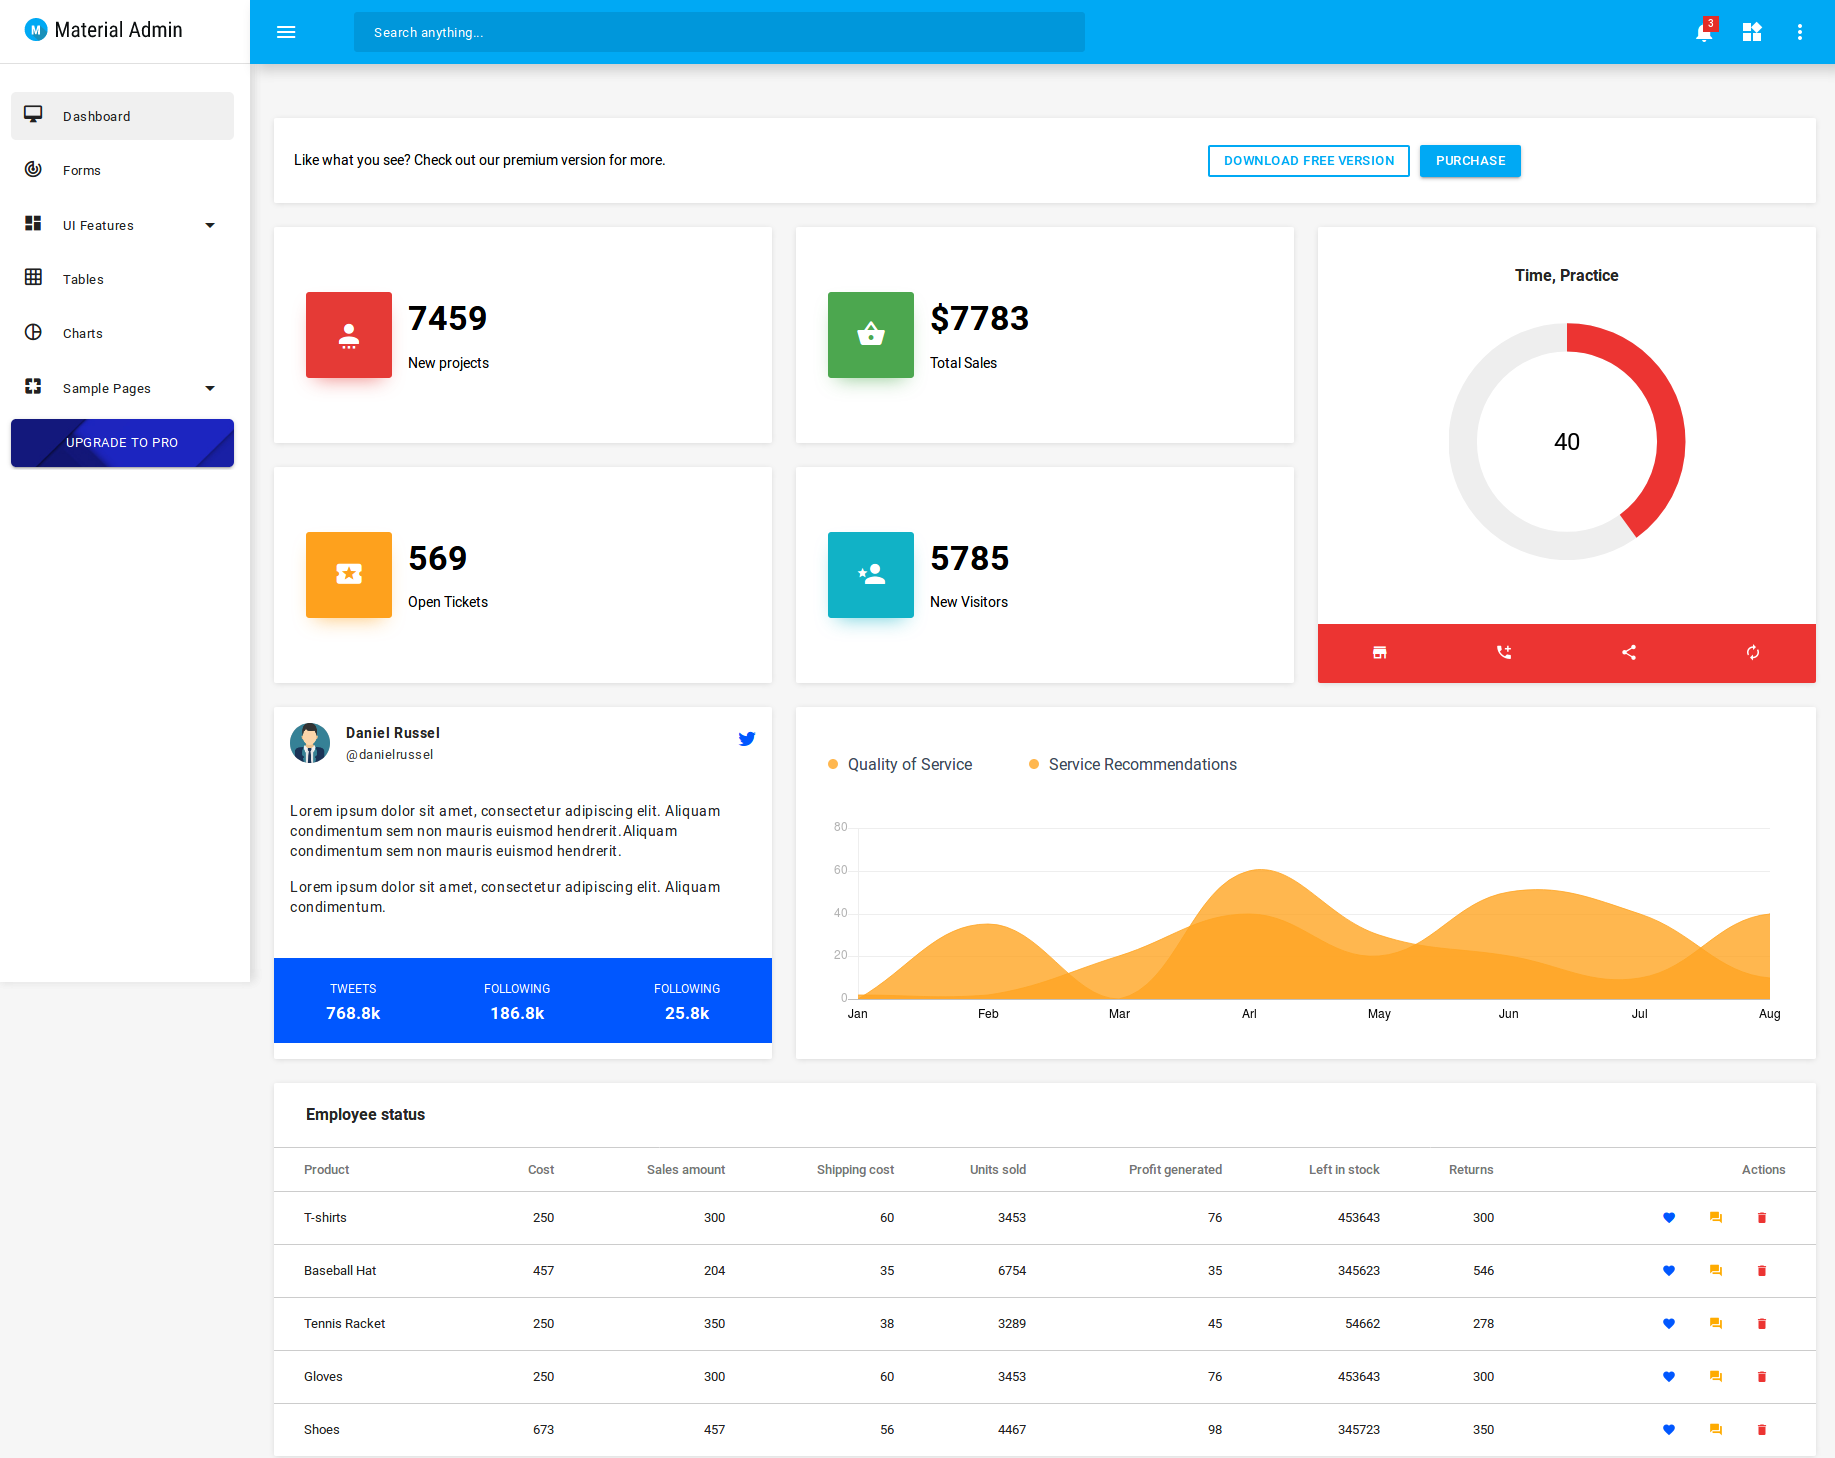 Free Bootstrap 4 Admin Template For Web Applications BEST HOME DESIGN 